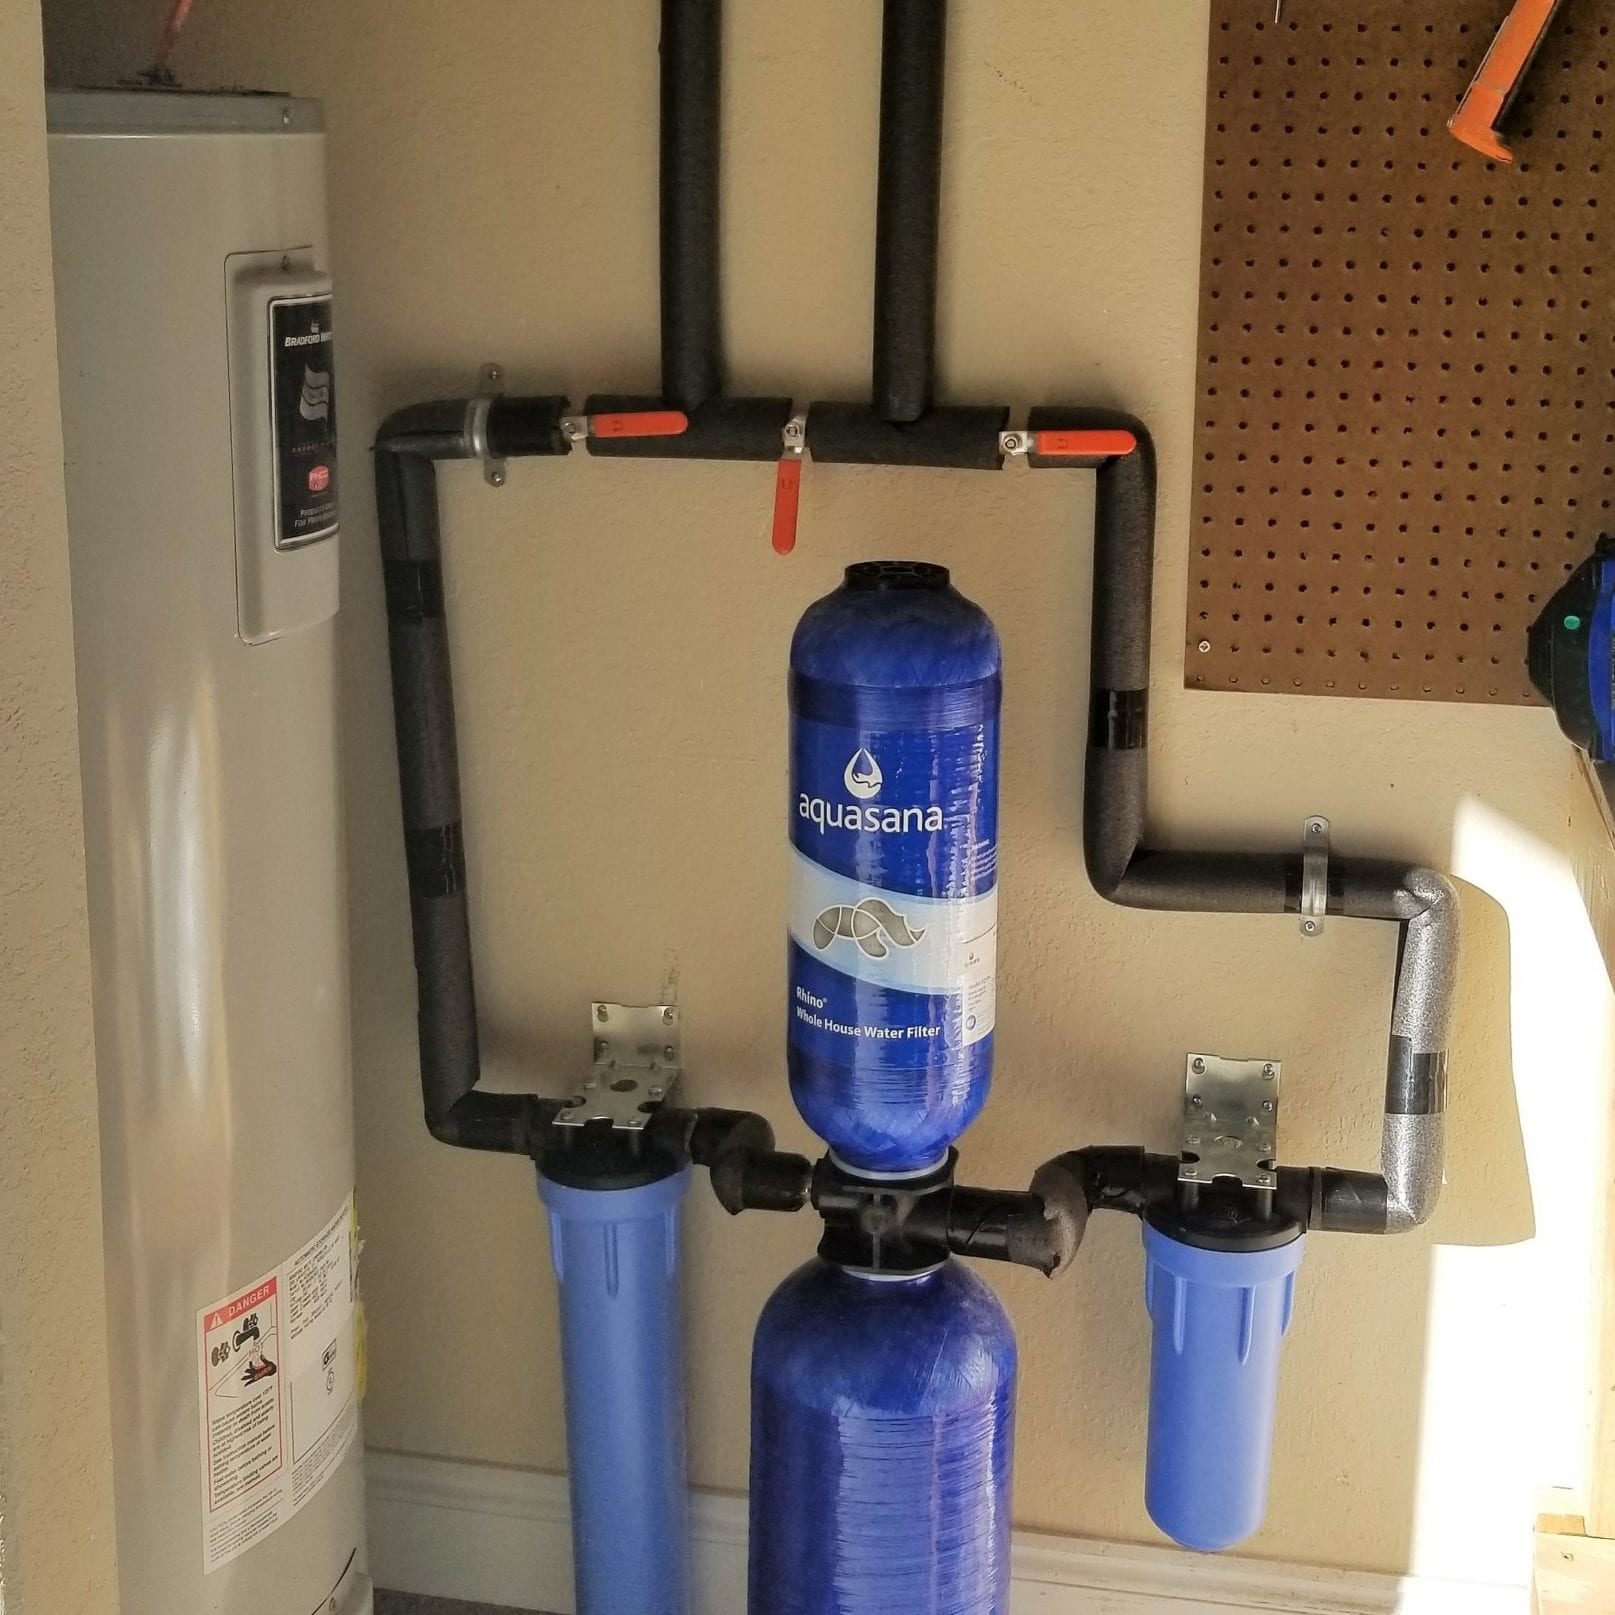 Image of an Aquasana water filtration system